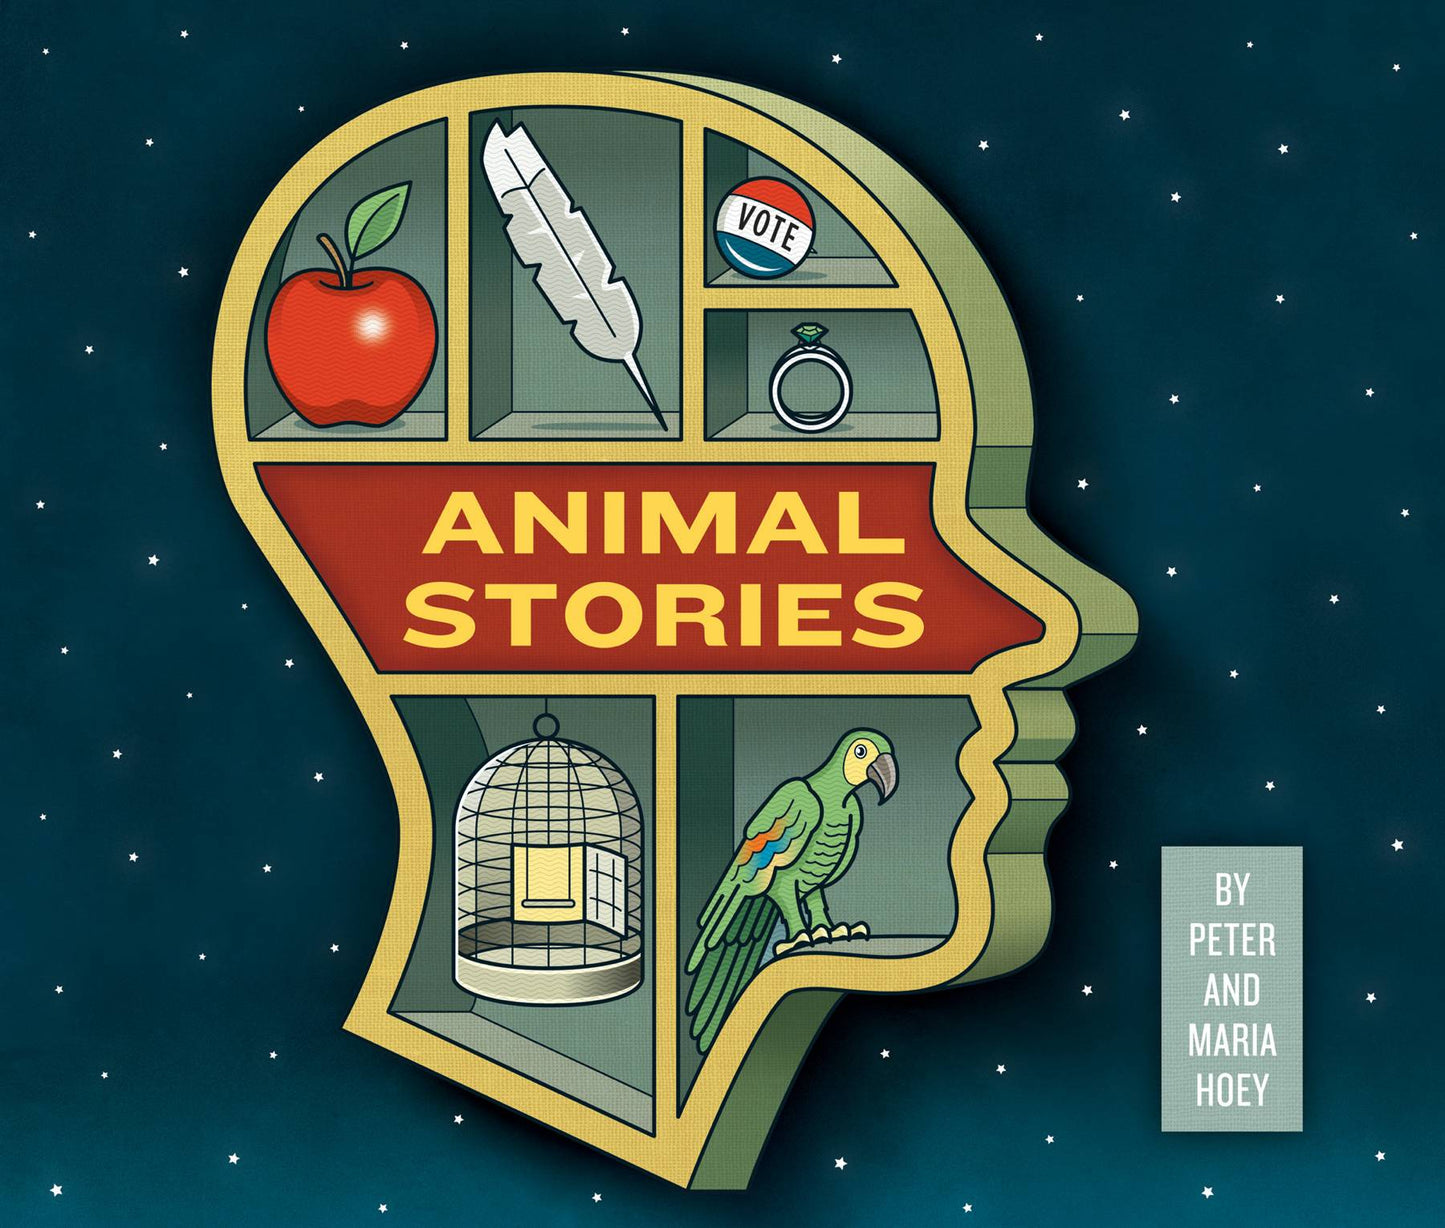 Animal Stories by Peter Hoey and Maria Hoey